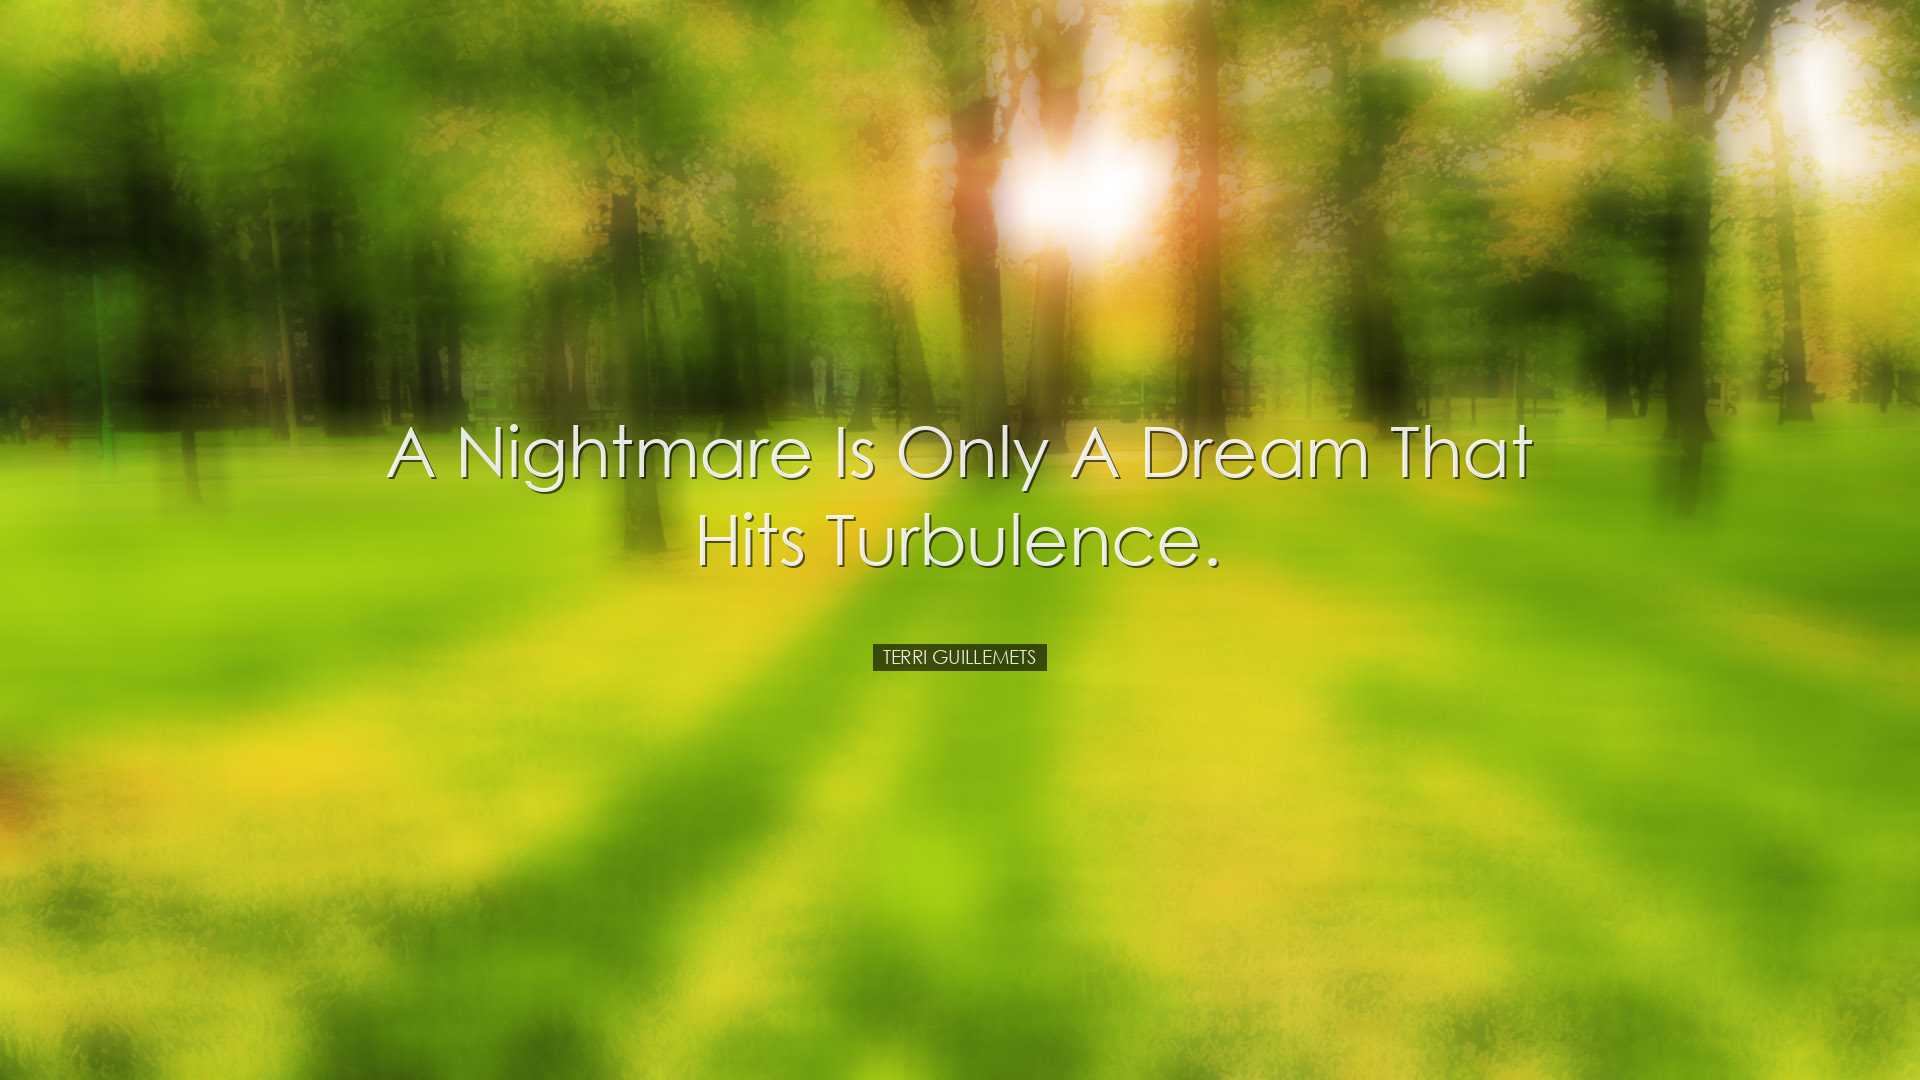 A nightmare is only a dream that hits turbulence. - Terri Guilleme